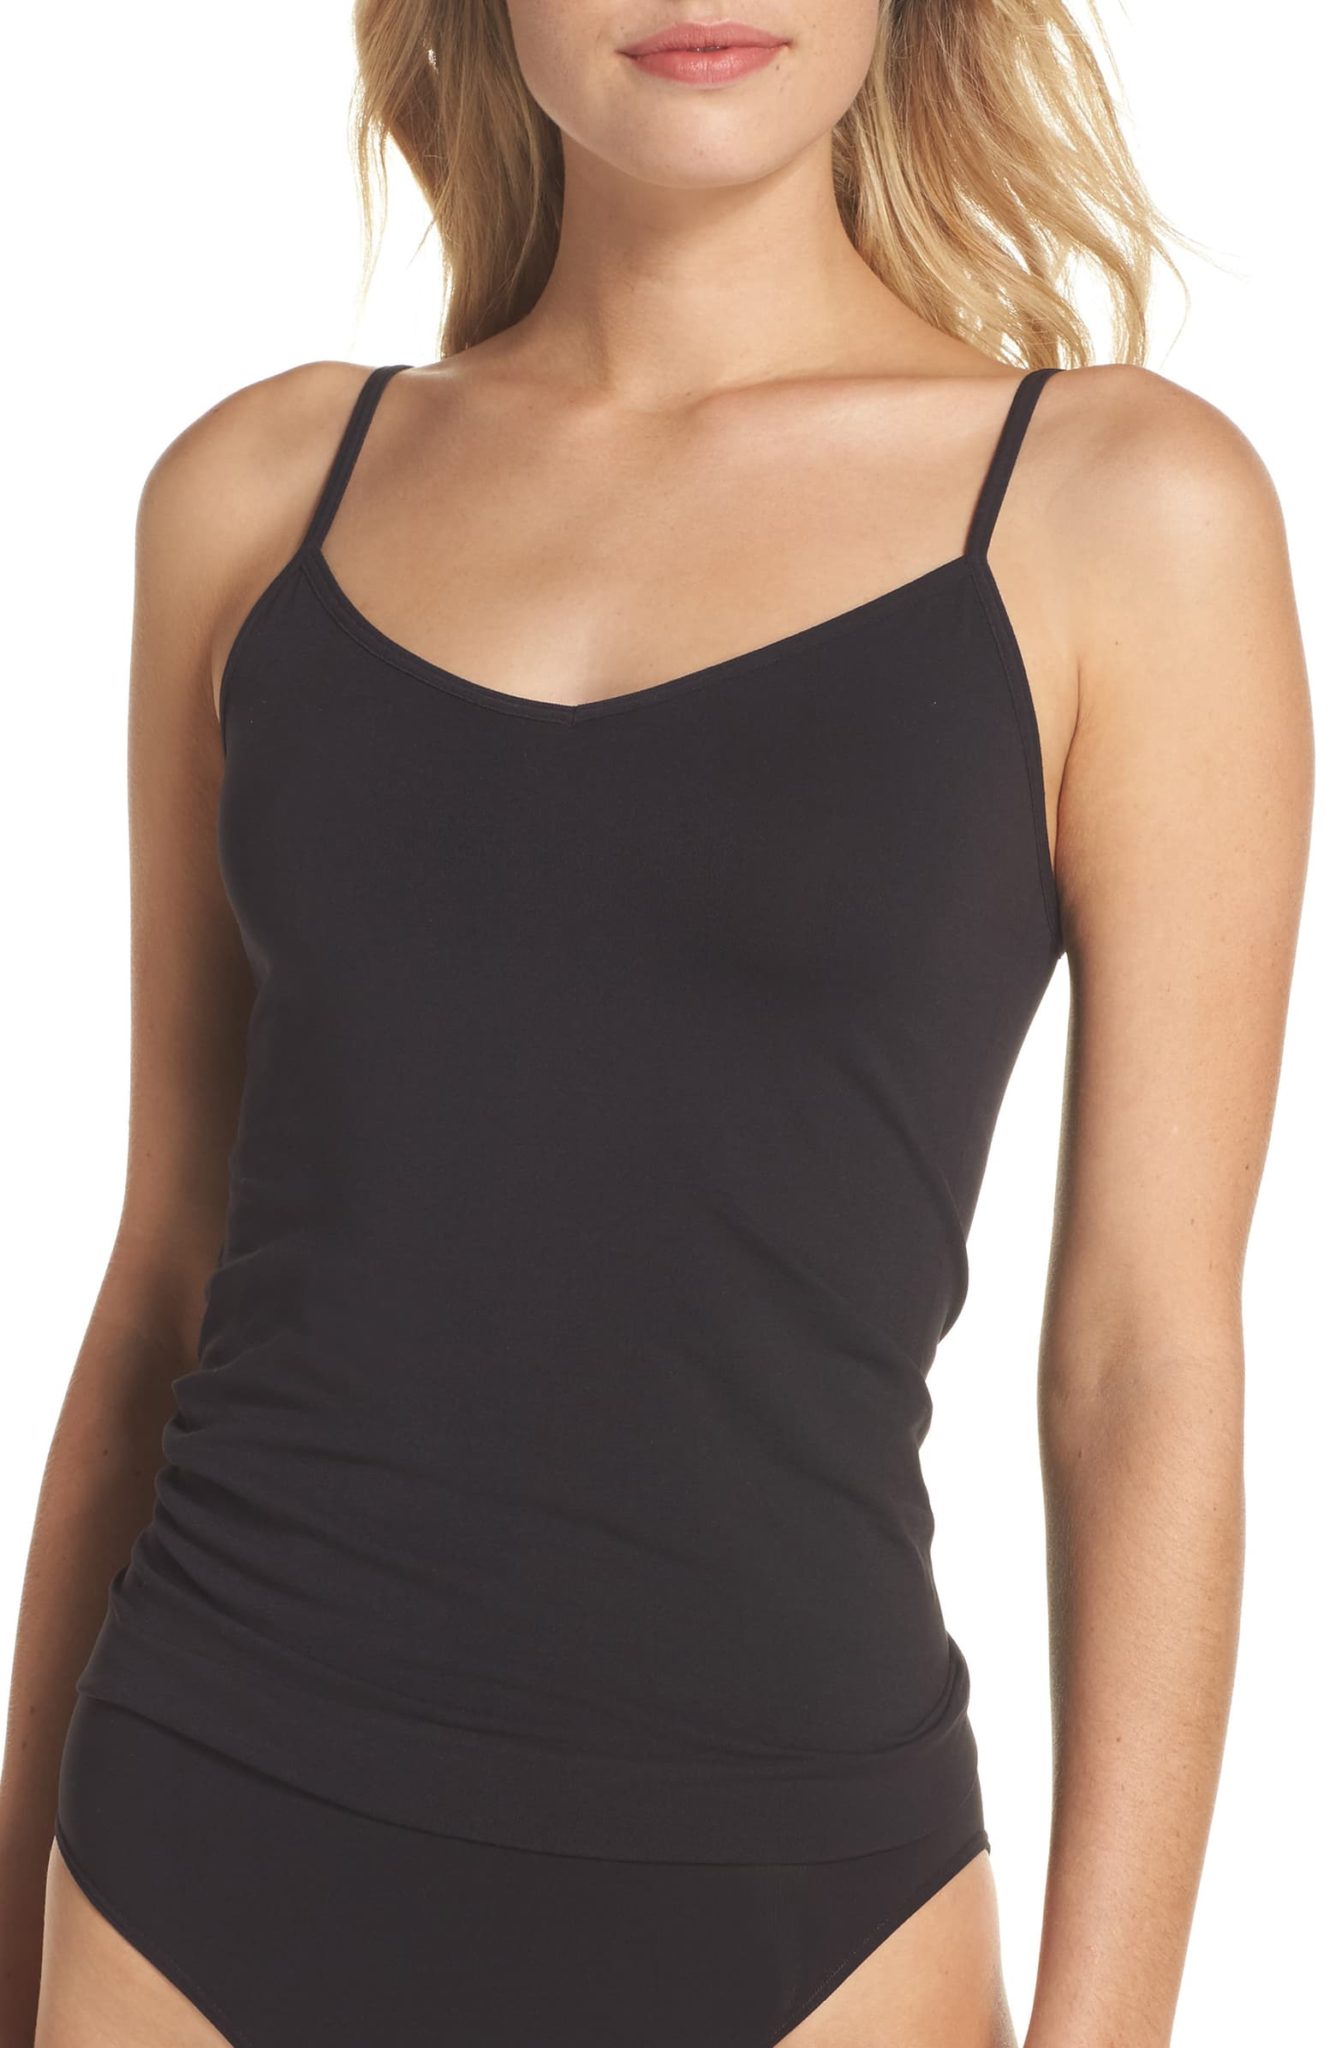 Not Wearing A Bra These Days? This $14 Comfy, Stretchy Cami Is The Next ...